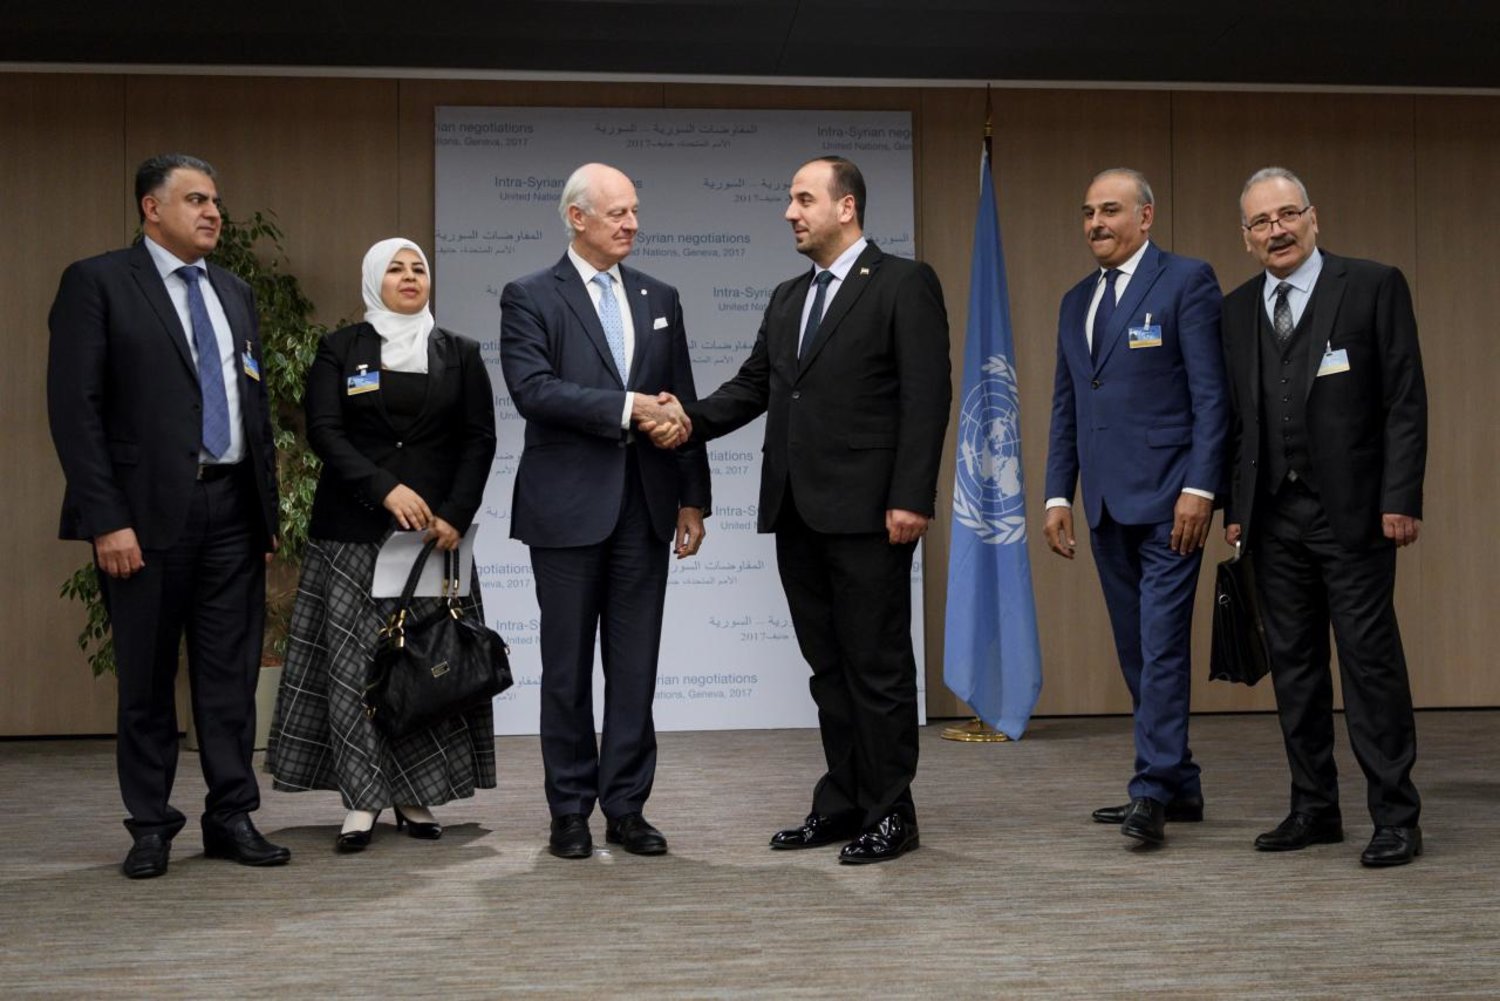 UN Special Envoy for Syria Staffan de Mistura meets Syrian opposition delegation members attending the opening of a new round of peace talks in Geneva, Switzerland. (Reuters)